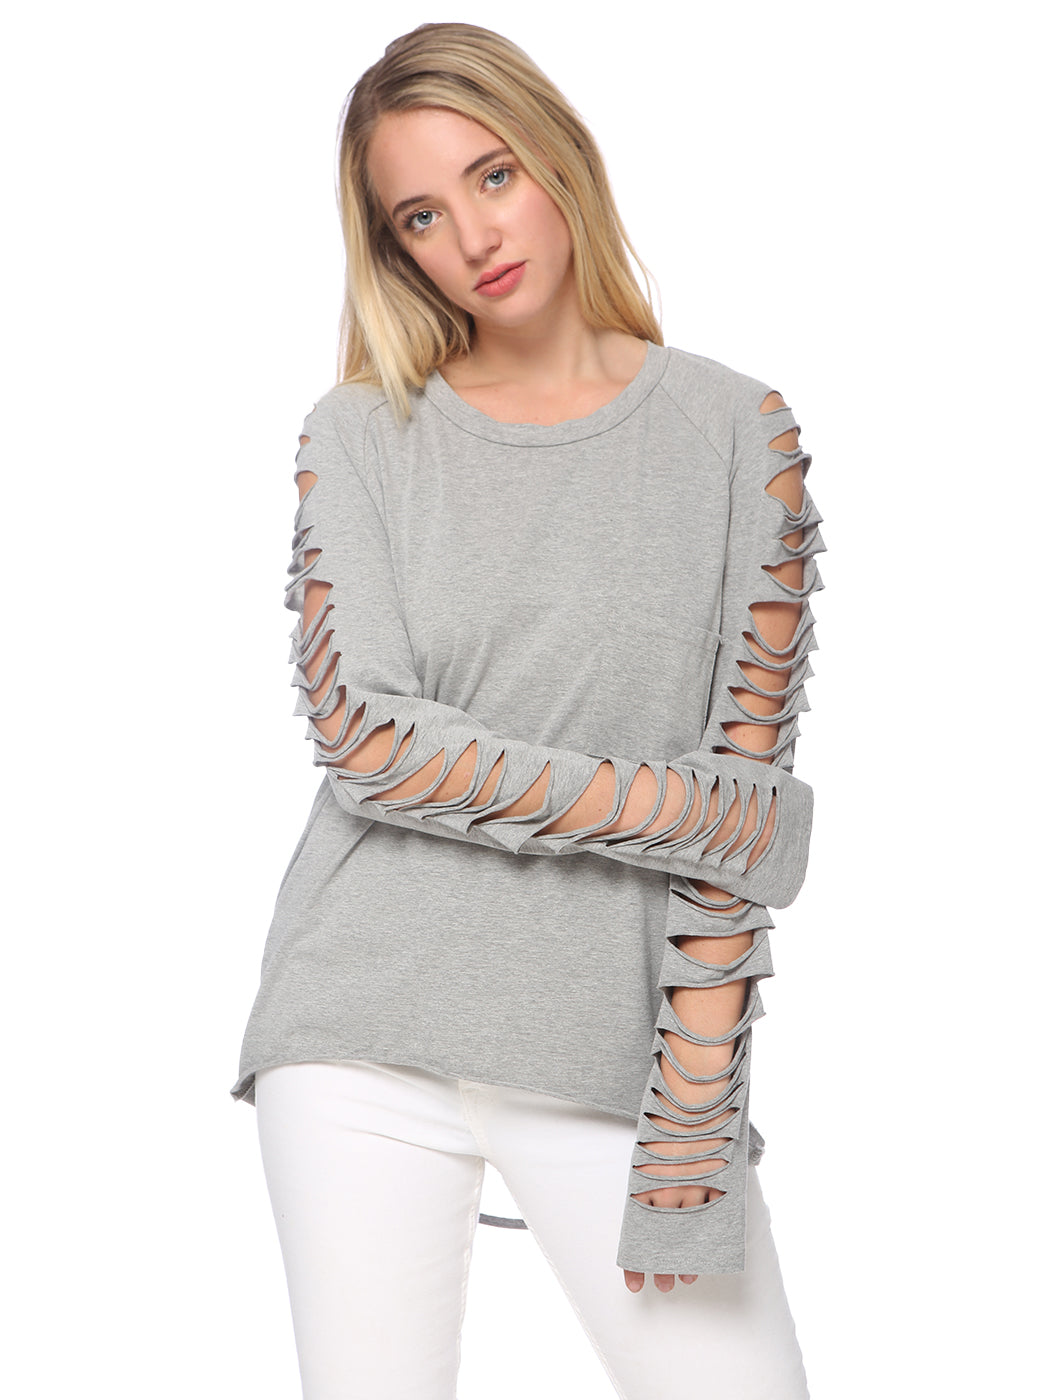 Ripped Long-Sleeve Pullover Top